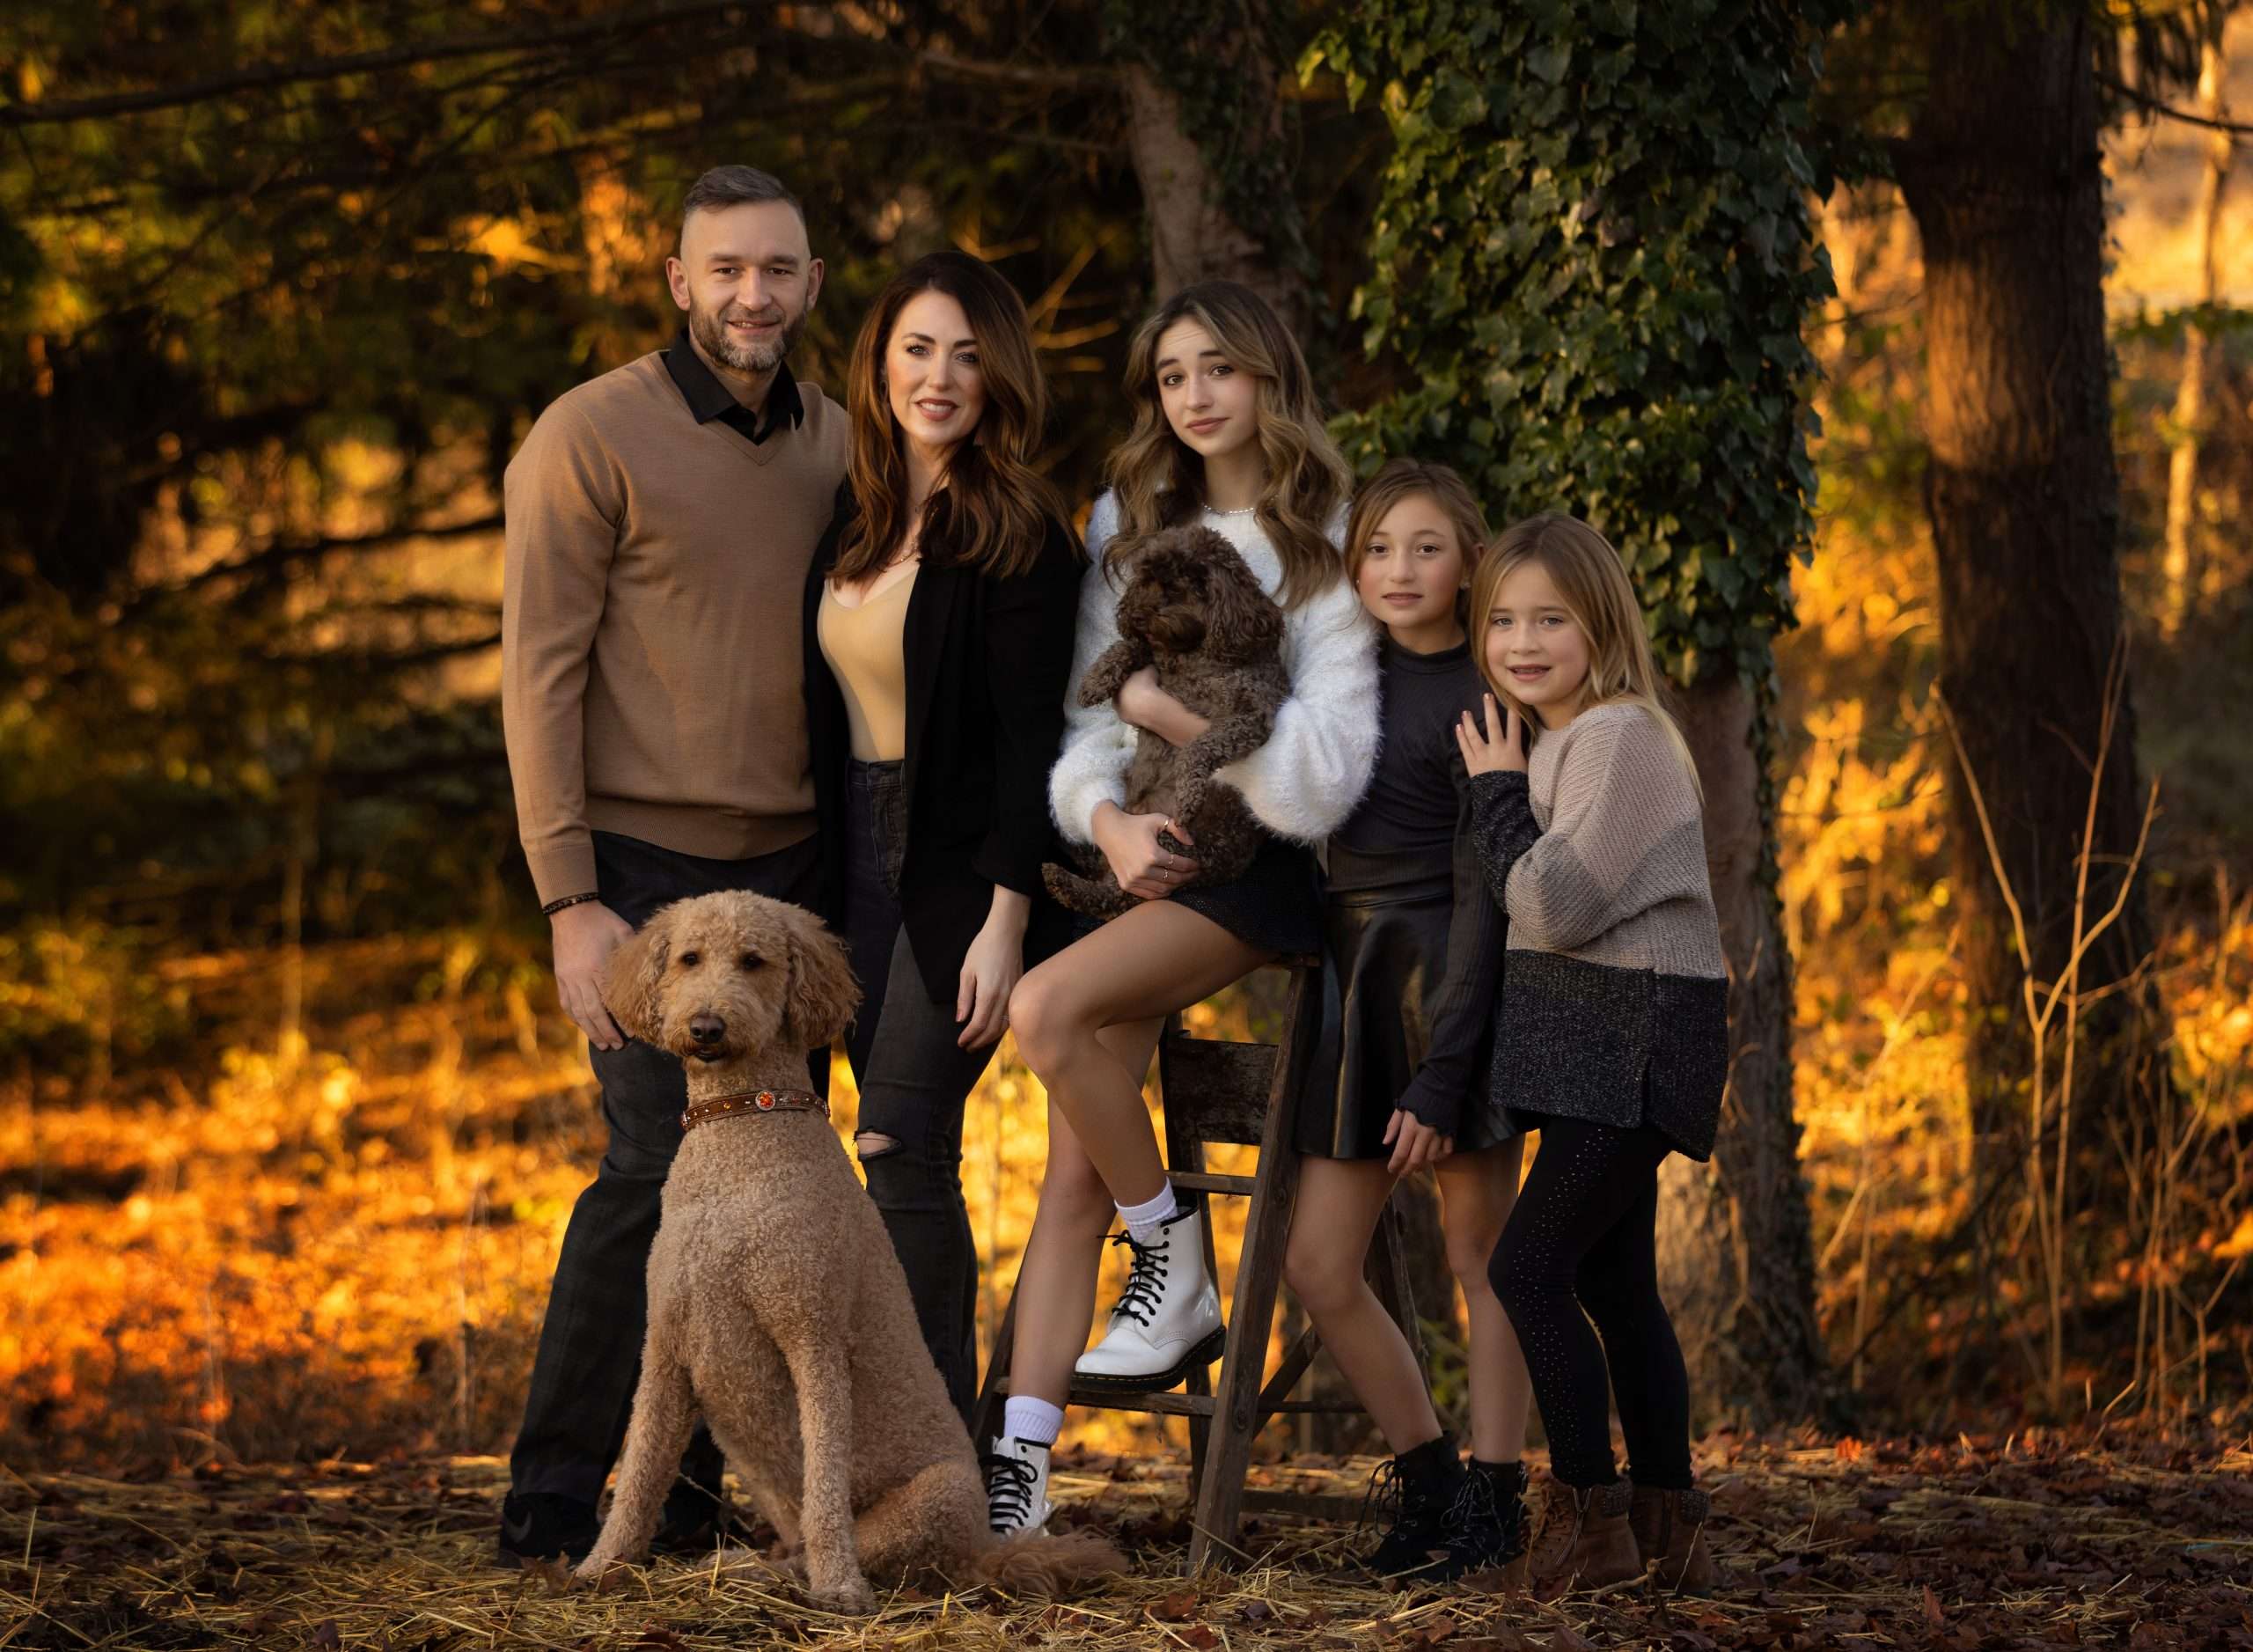 family photography in Columbus OH, Upper Arlington OH family photographer, professional family photos